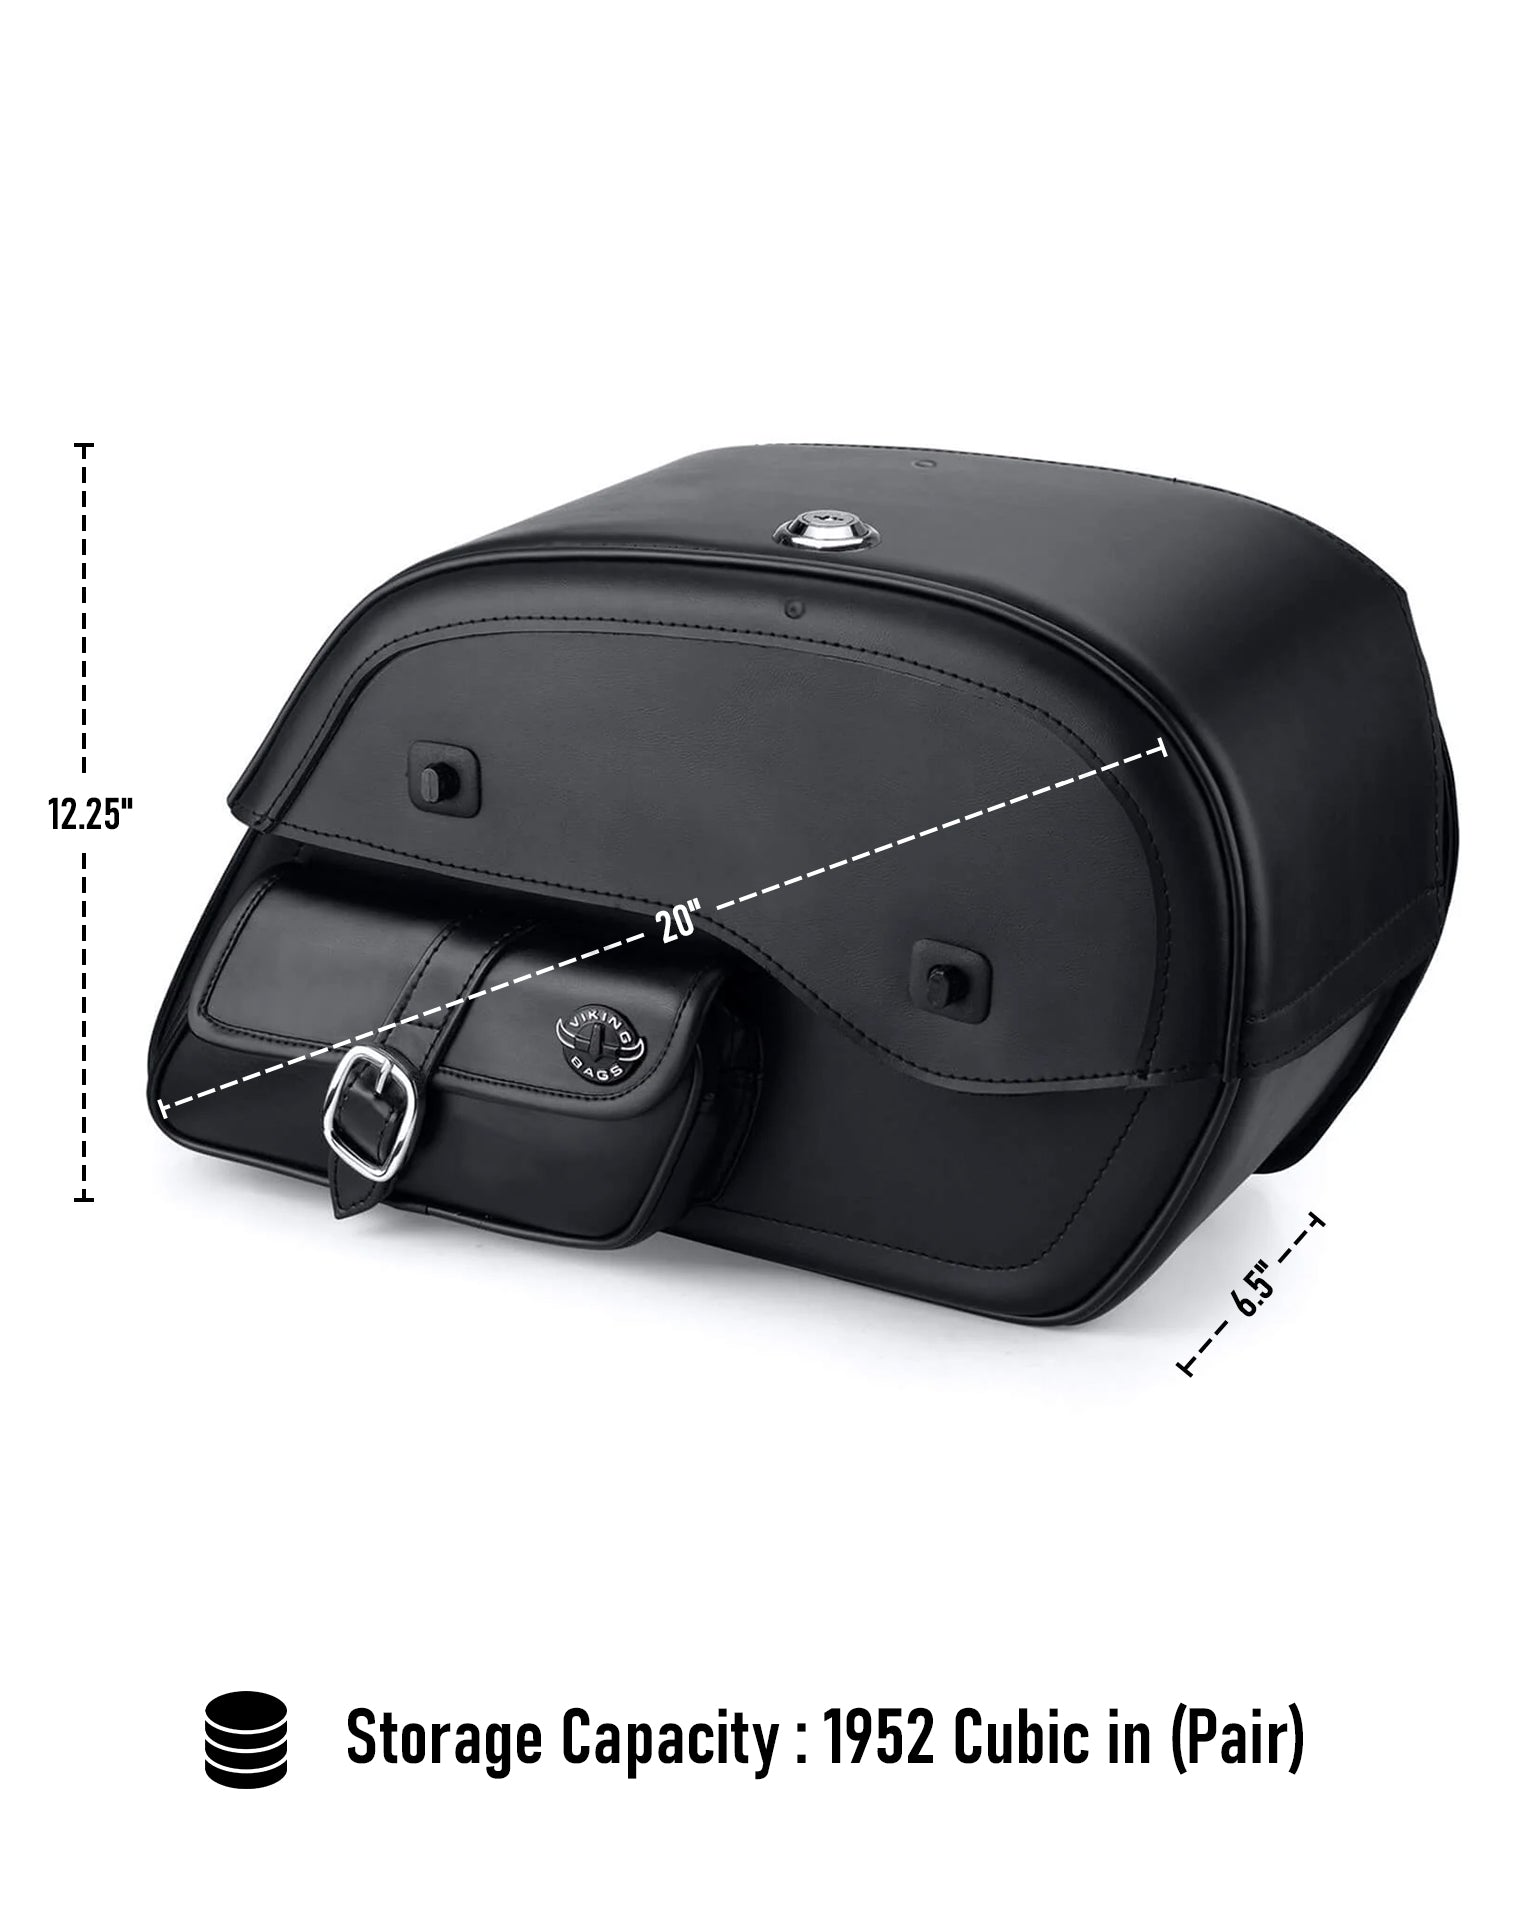 Viking Essential Side Pocket Large Leather Motorcycle Saddlebags For Harley Softail Fat Boy Lo Flstfb Can Store Your Ridings Gears